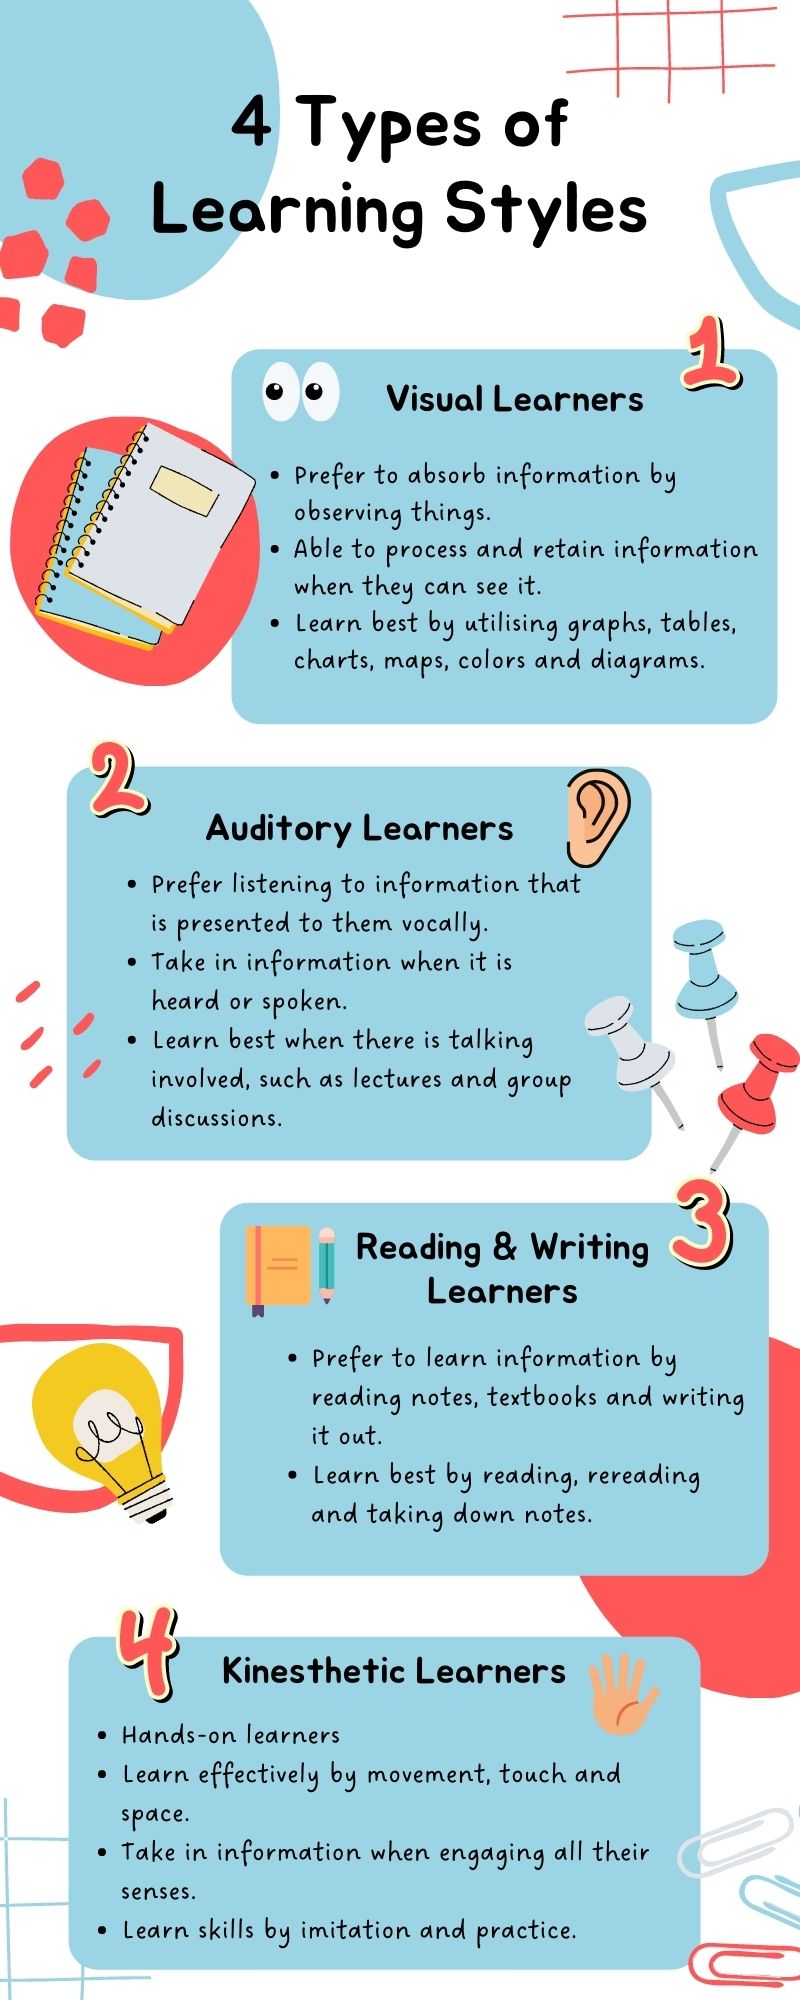 assignment on learning styles